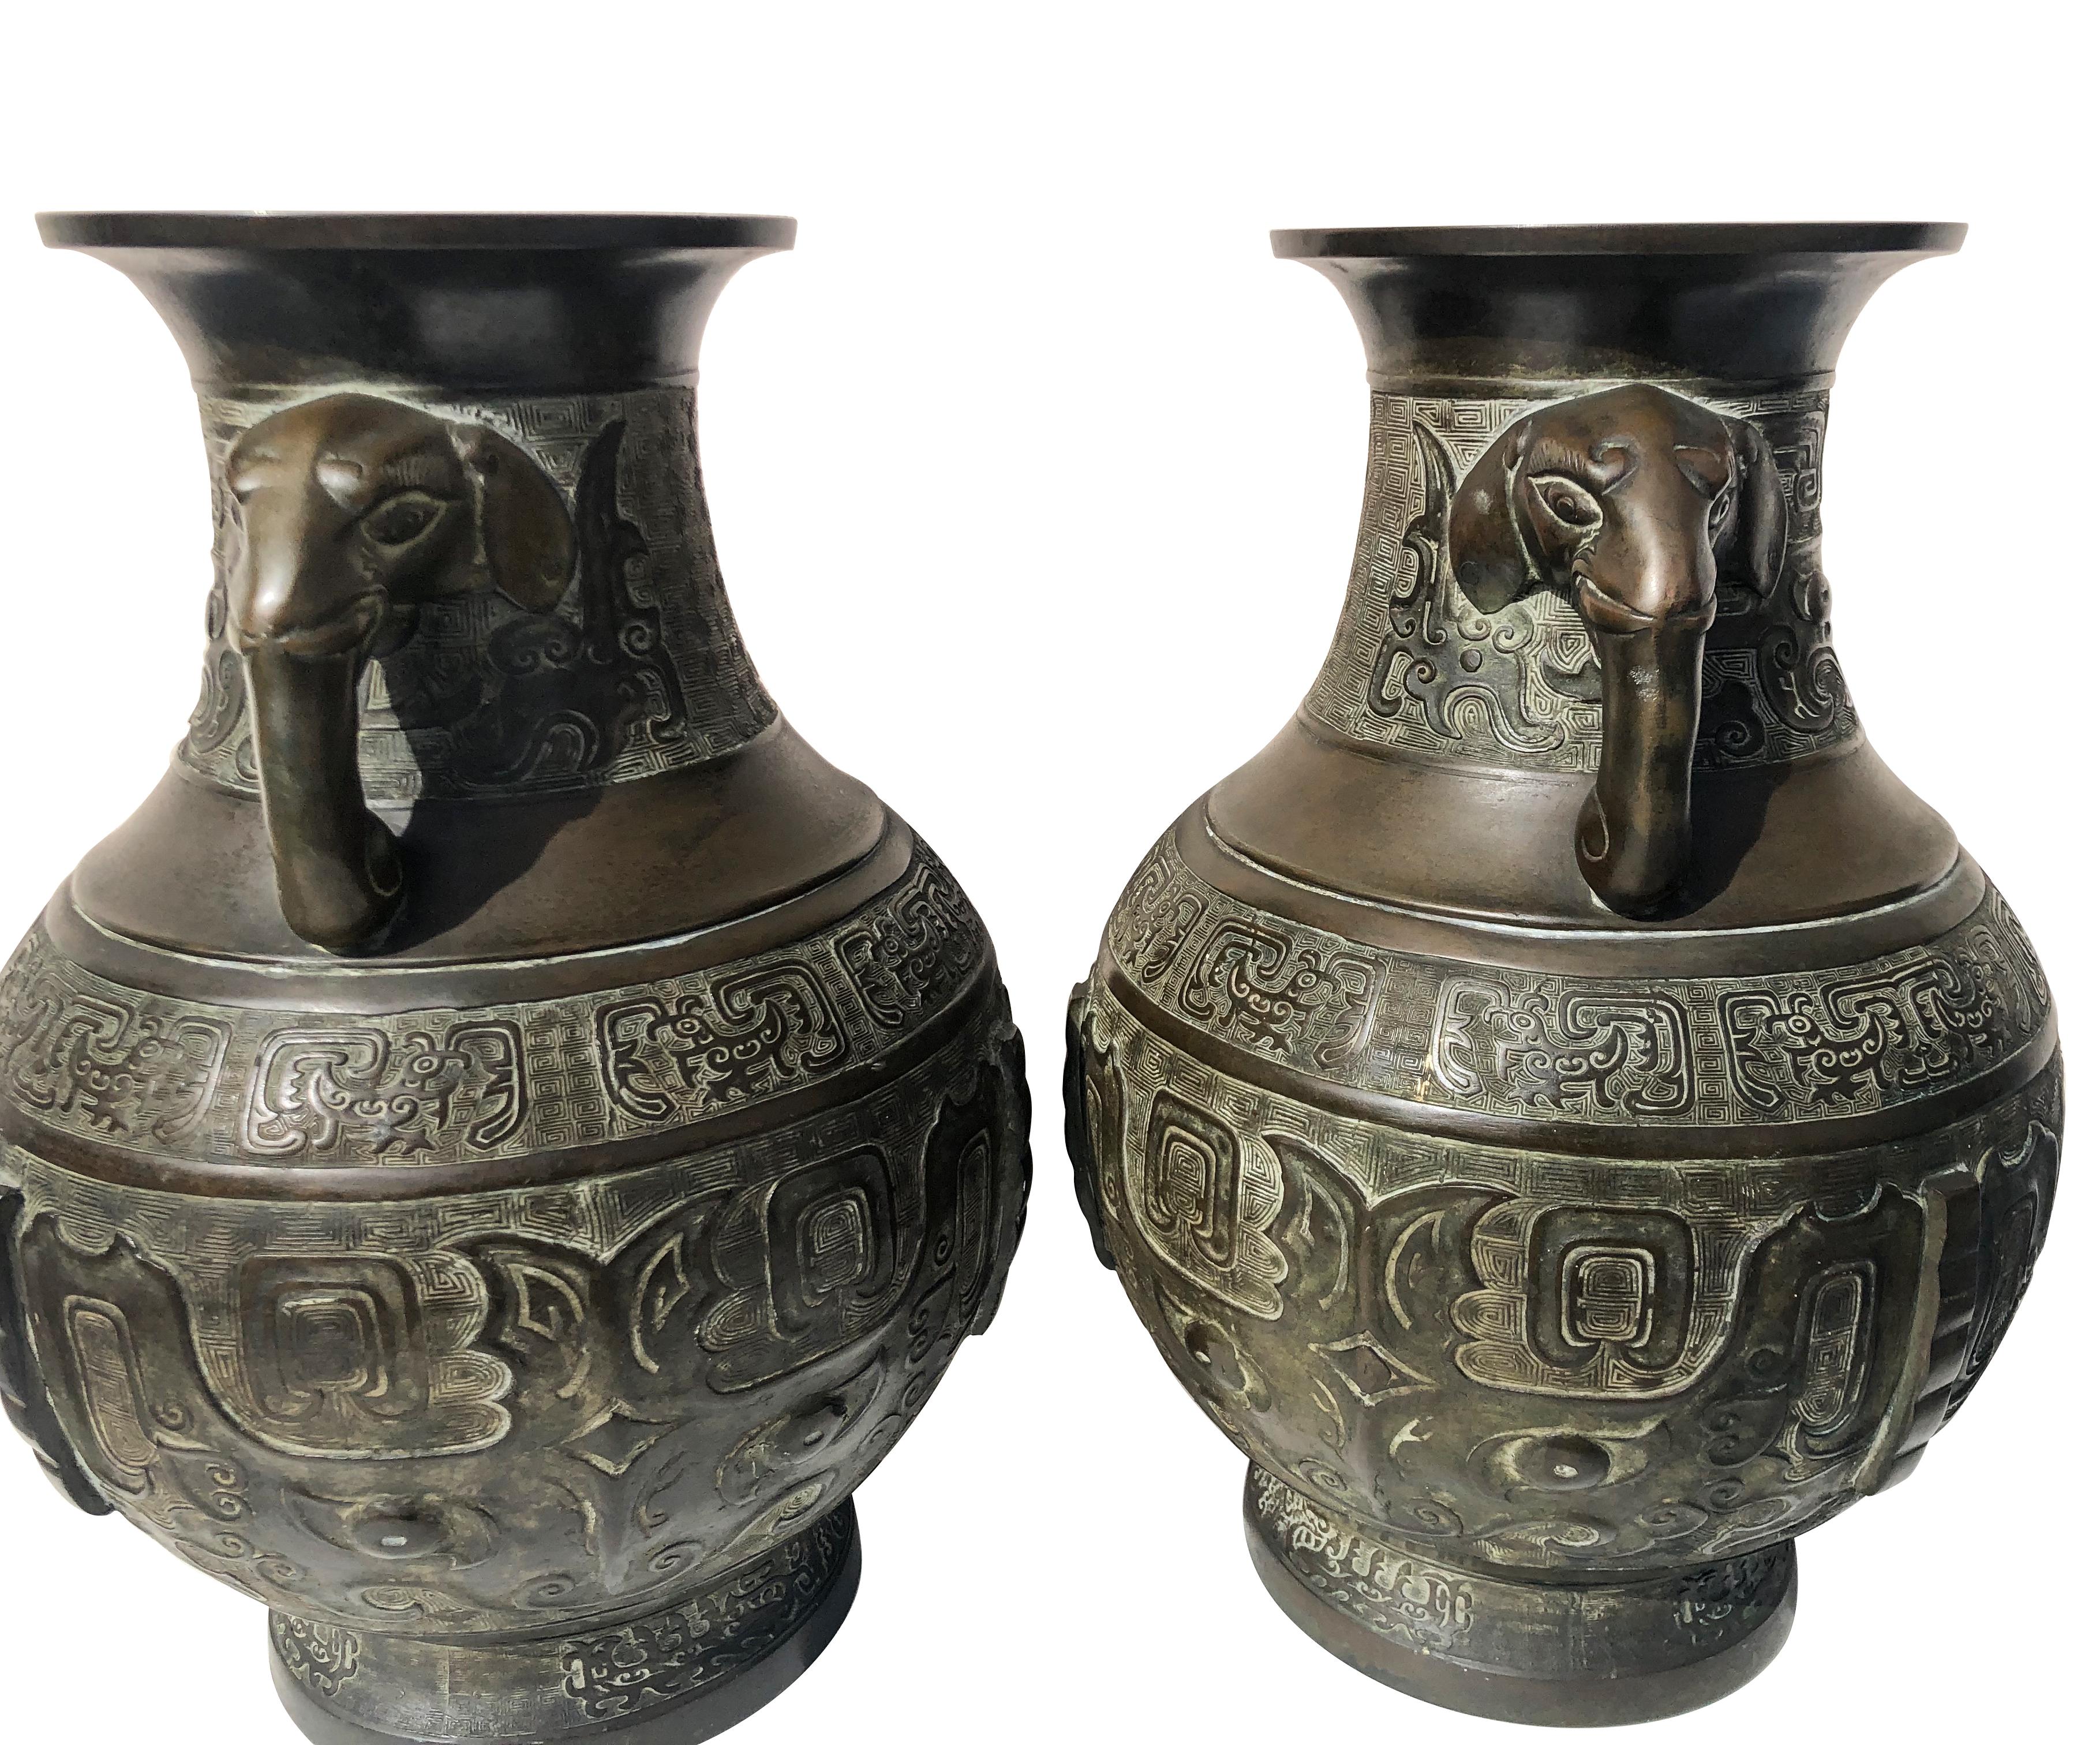  Pair of Late 19th Century Japanese Bronze Vases  - Sculpture by Unknown